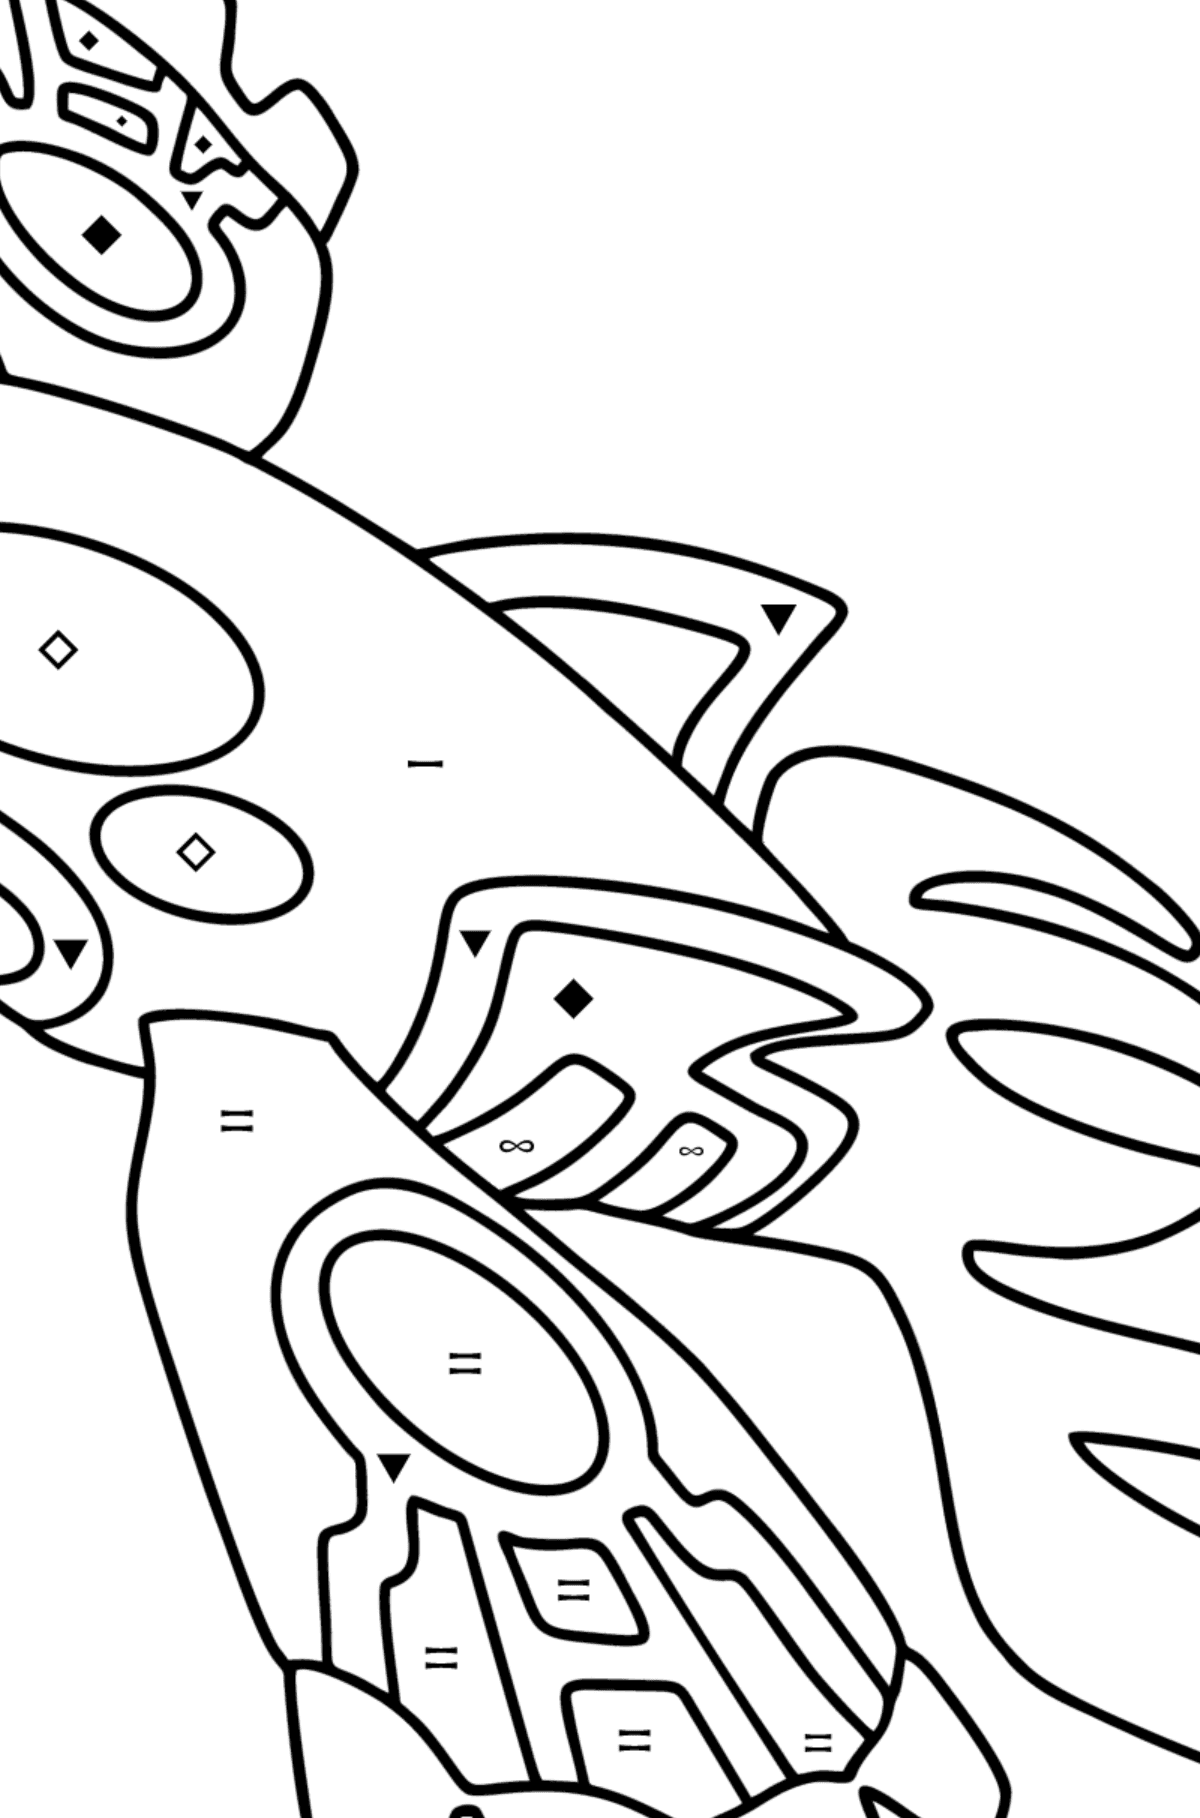 Coloring page Pokemon Go Kyogre - Coloring by Symbols for Kids